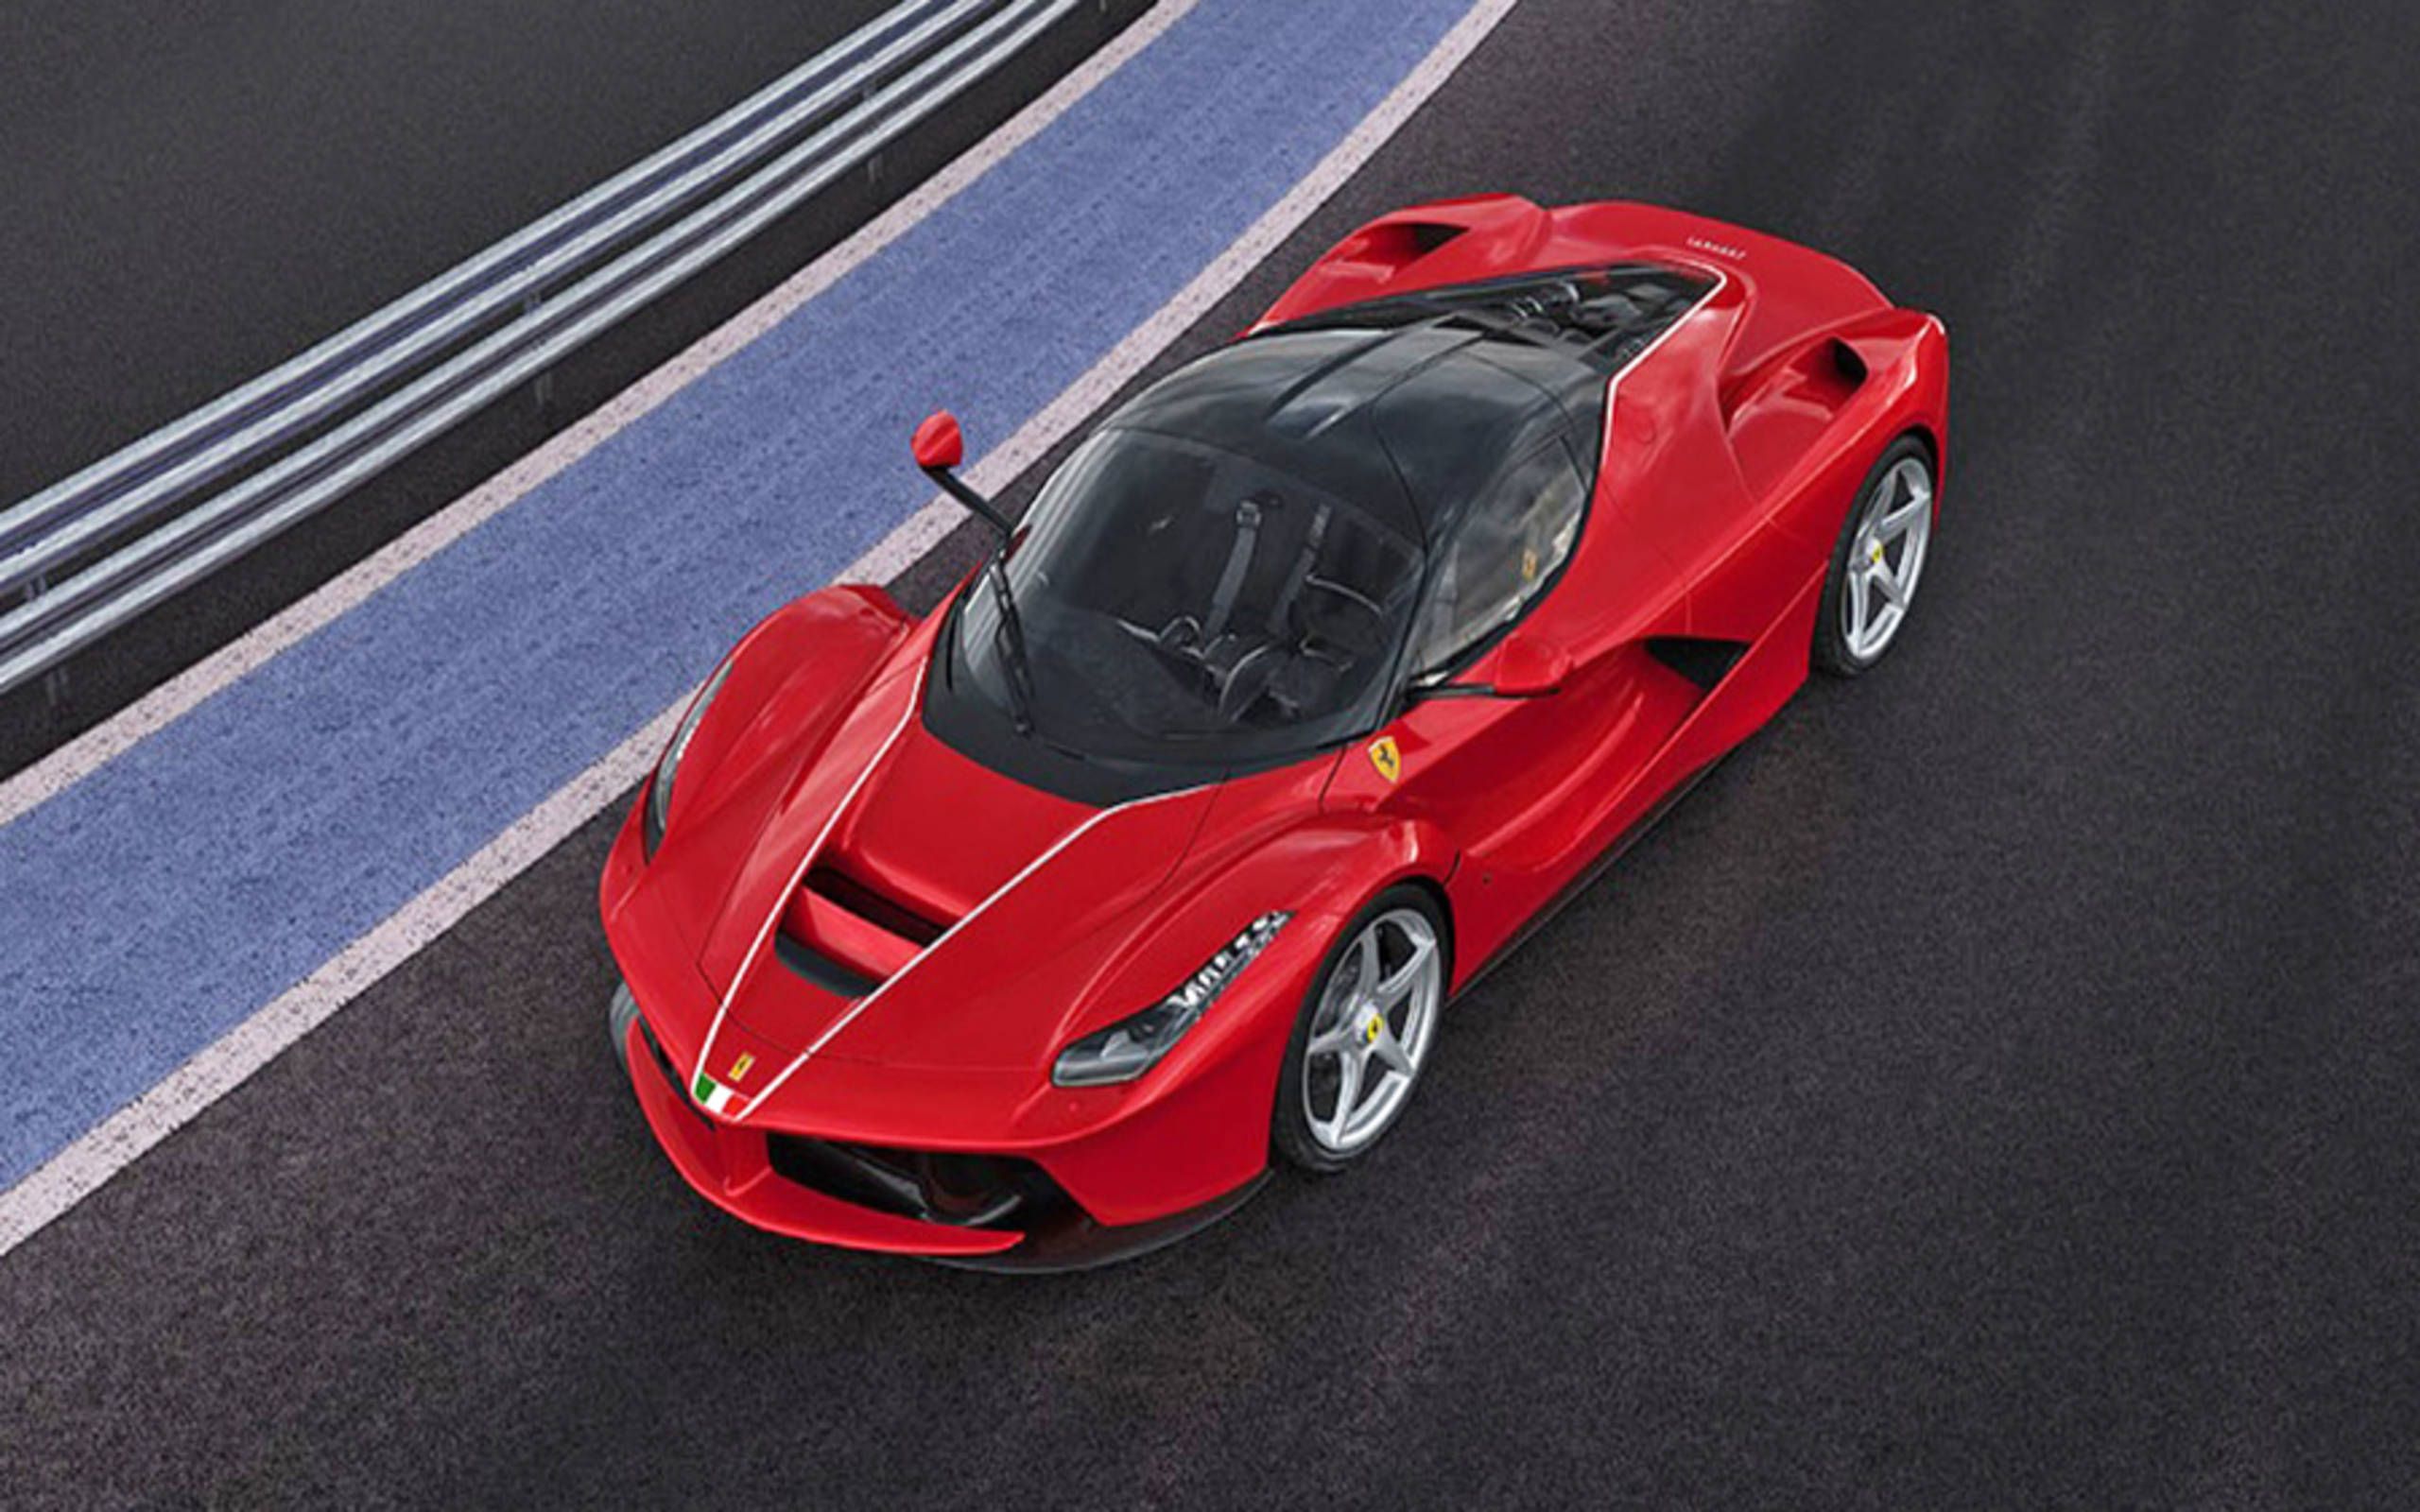 Very last LaFerrari brings a record $7 million at auction